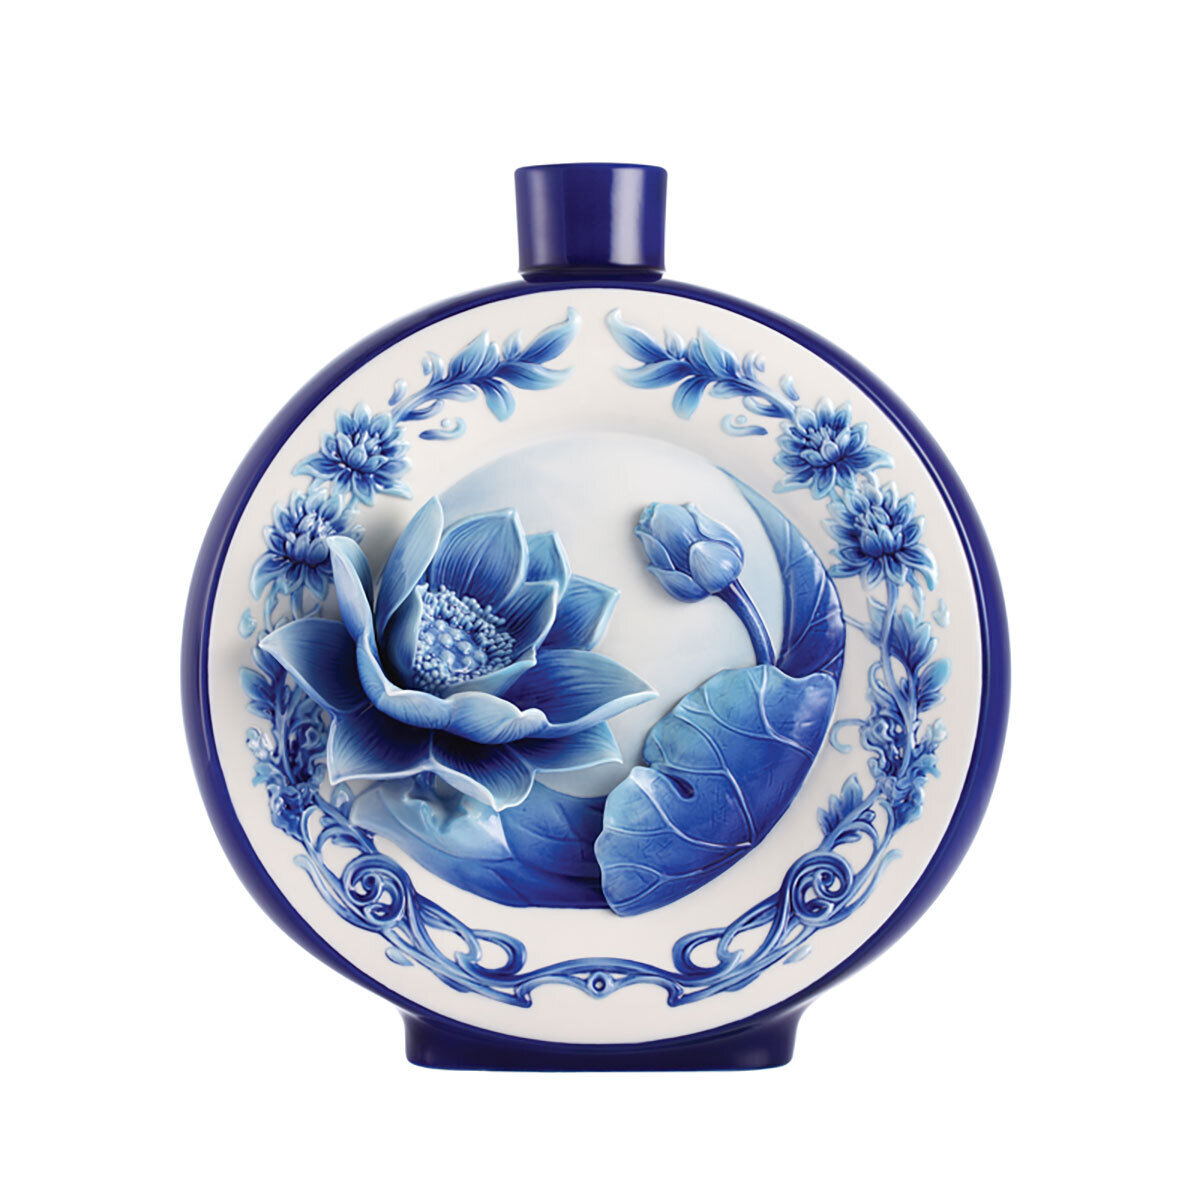 Franz Porcelain Honesty and Virtues The Lotus Vase Limited Editon of 2000 FZ03040